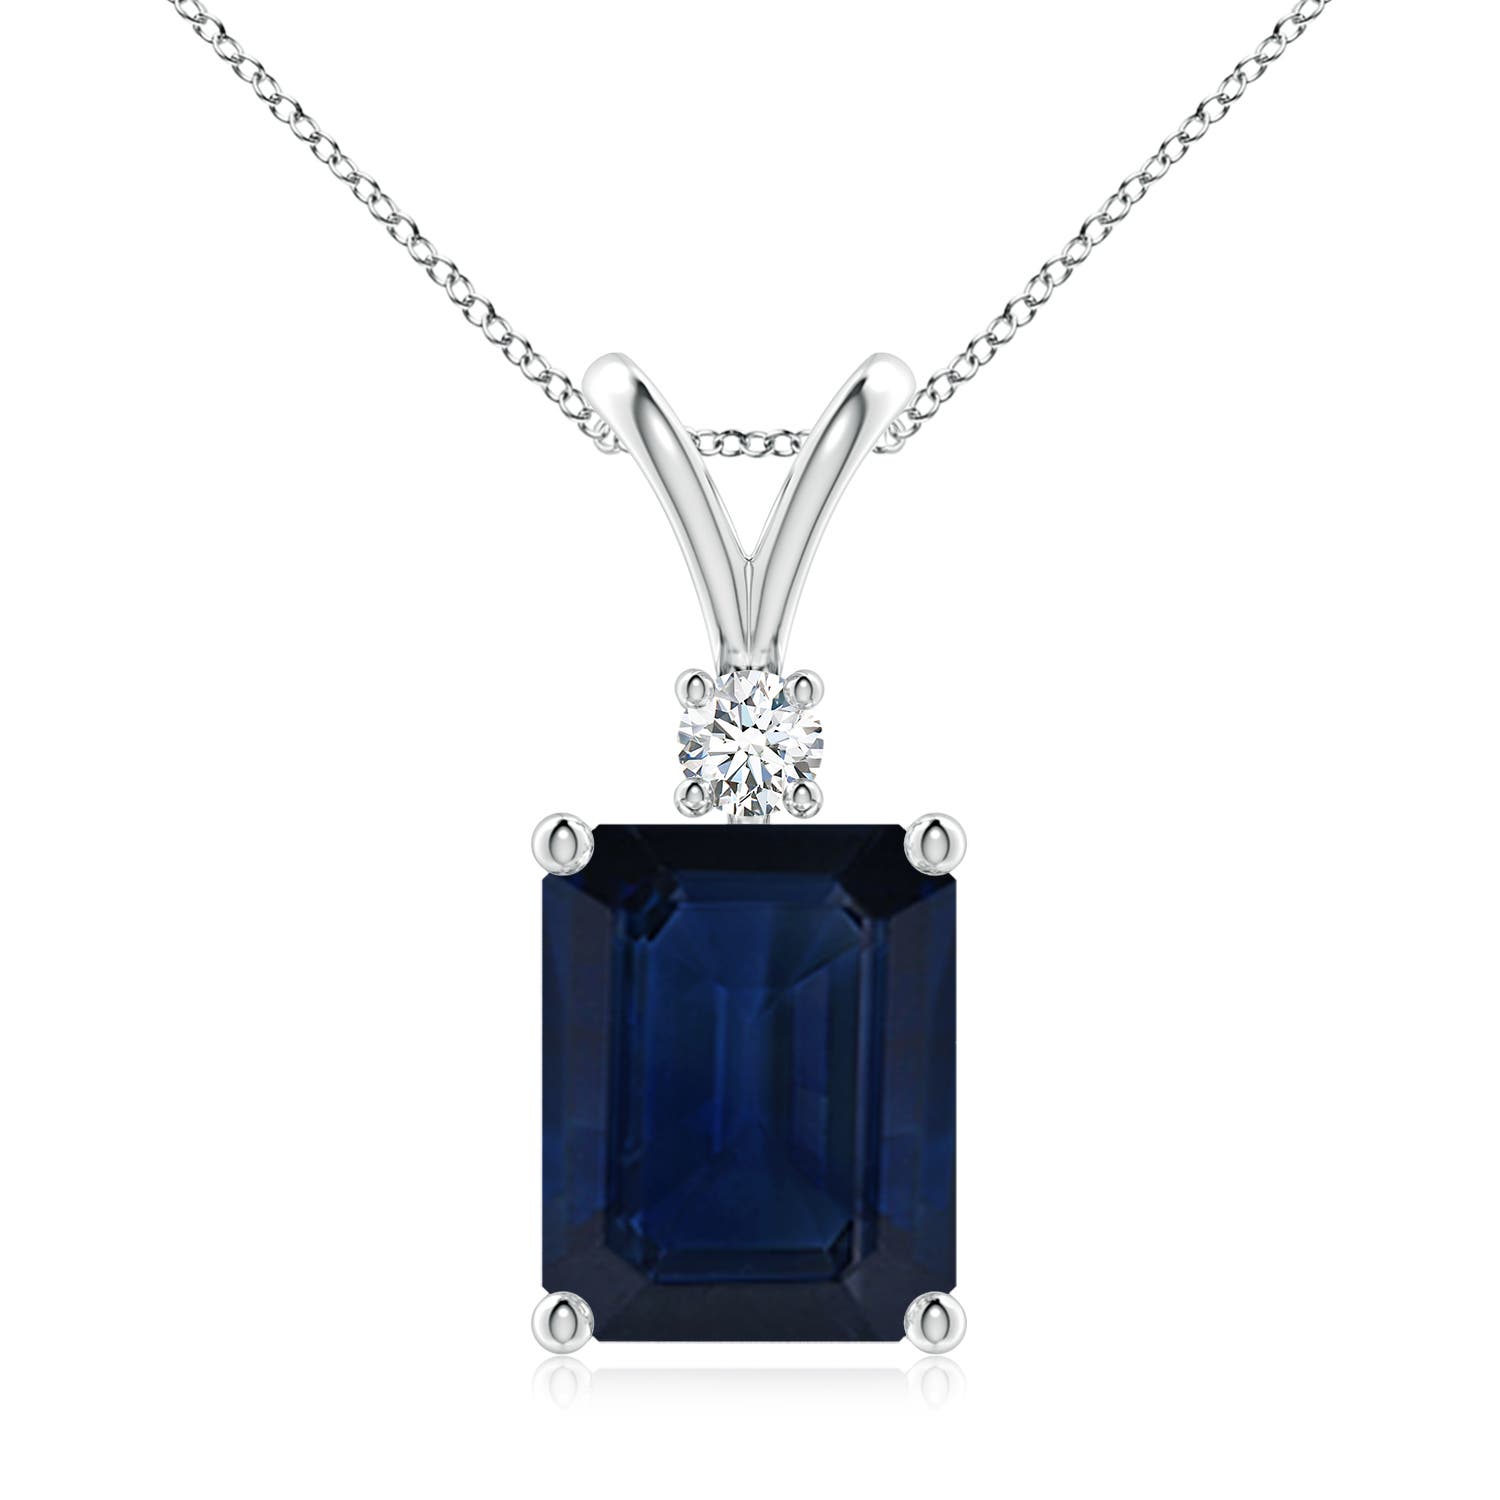 AA - Blue Sapphire / 3.51 CT / 14 KT White Gold